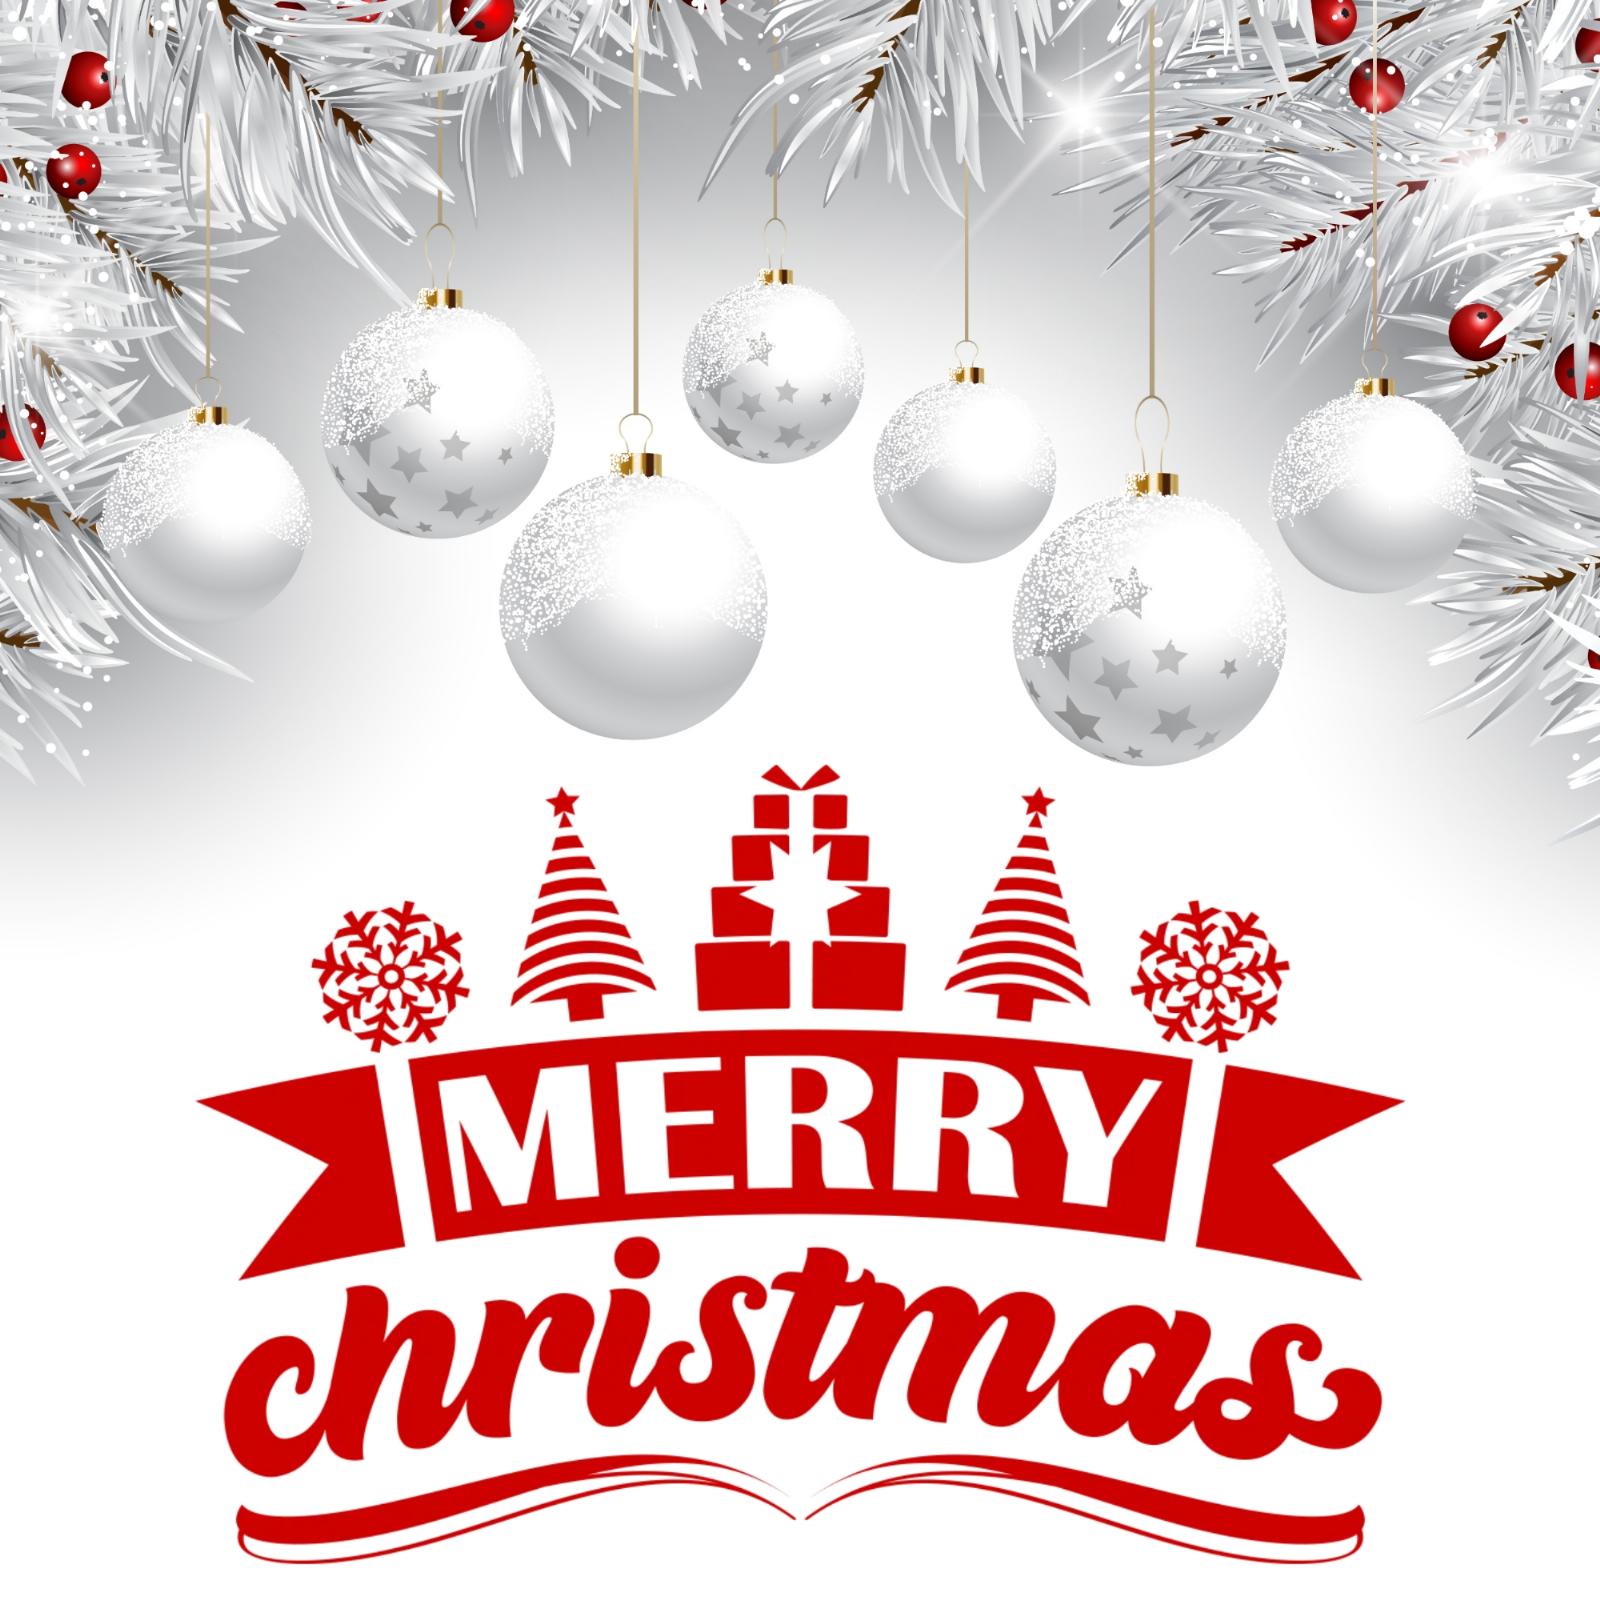 Merry Christmas Images Hd